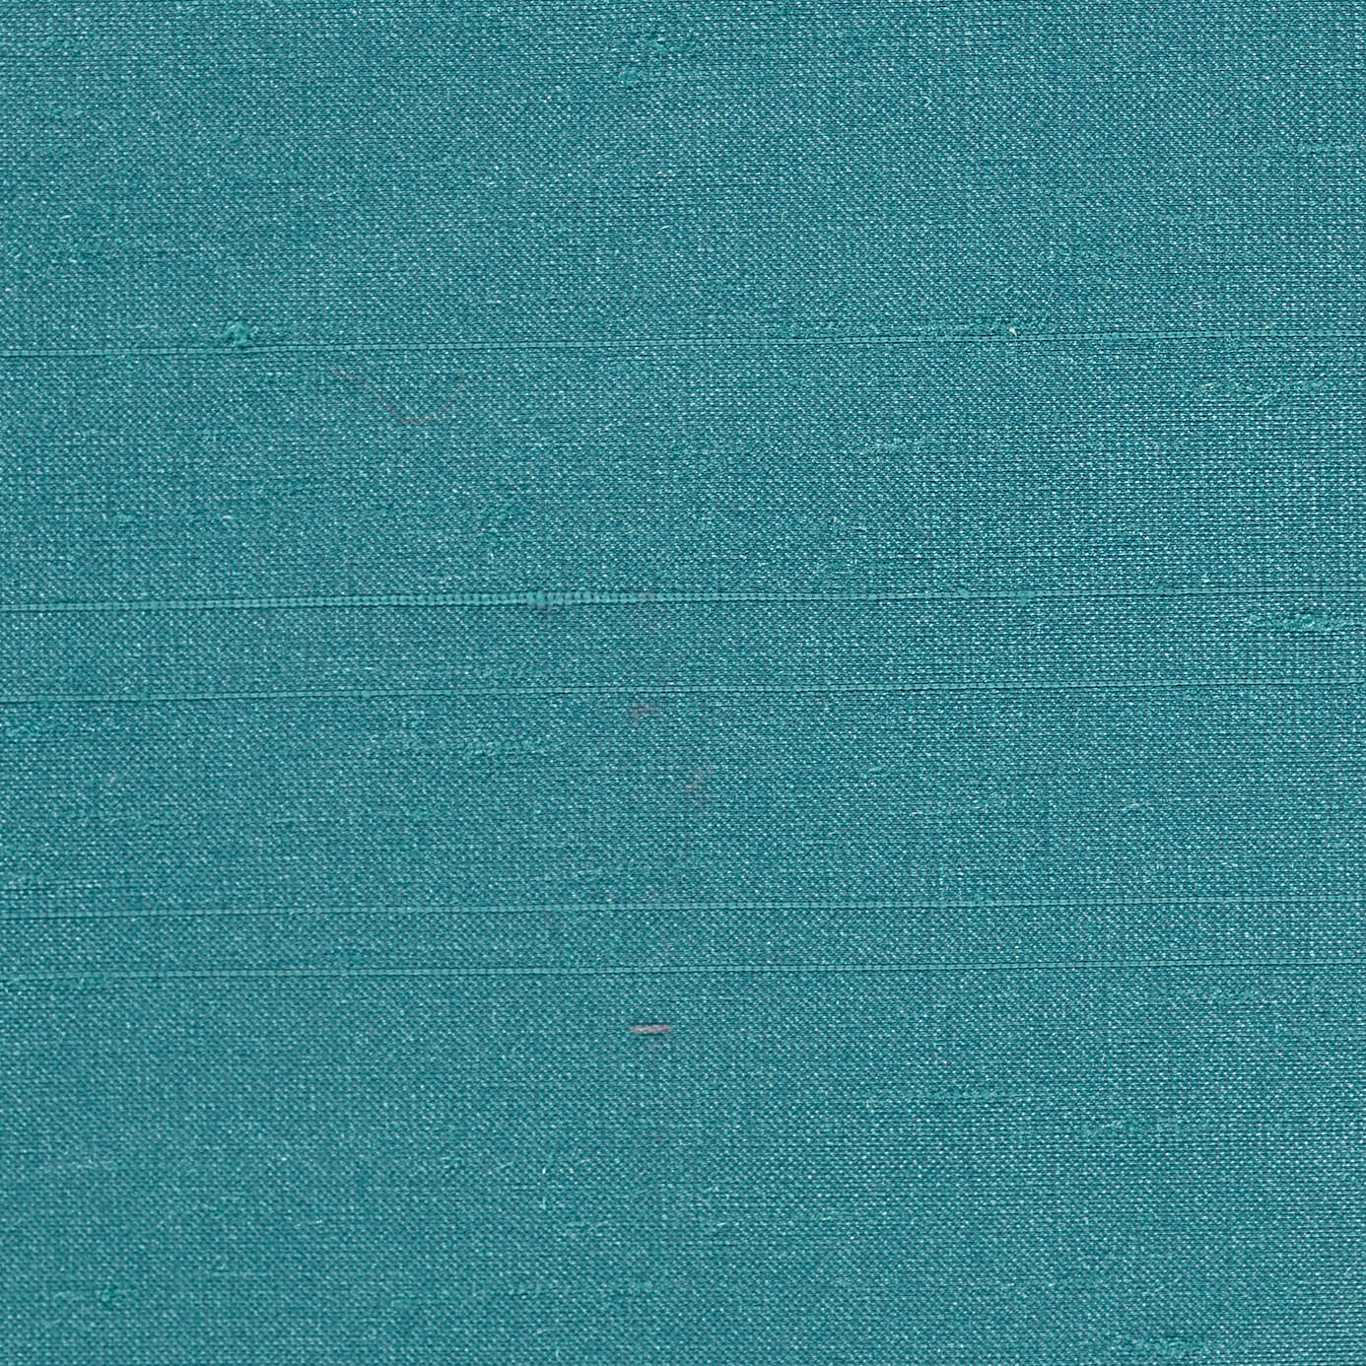 Deflect Fabric by Harlequin - HPOL440559 - Sea Blue